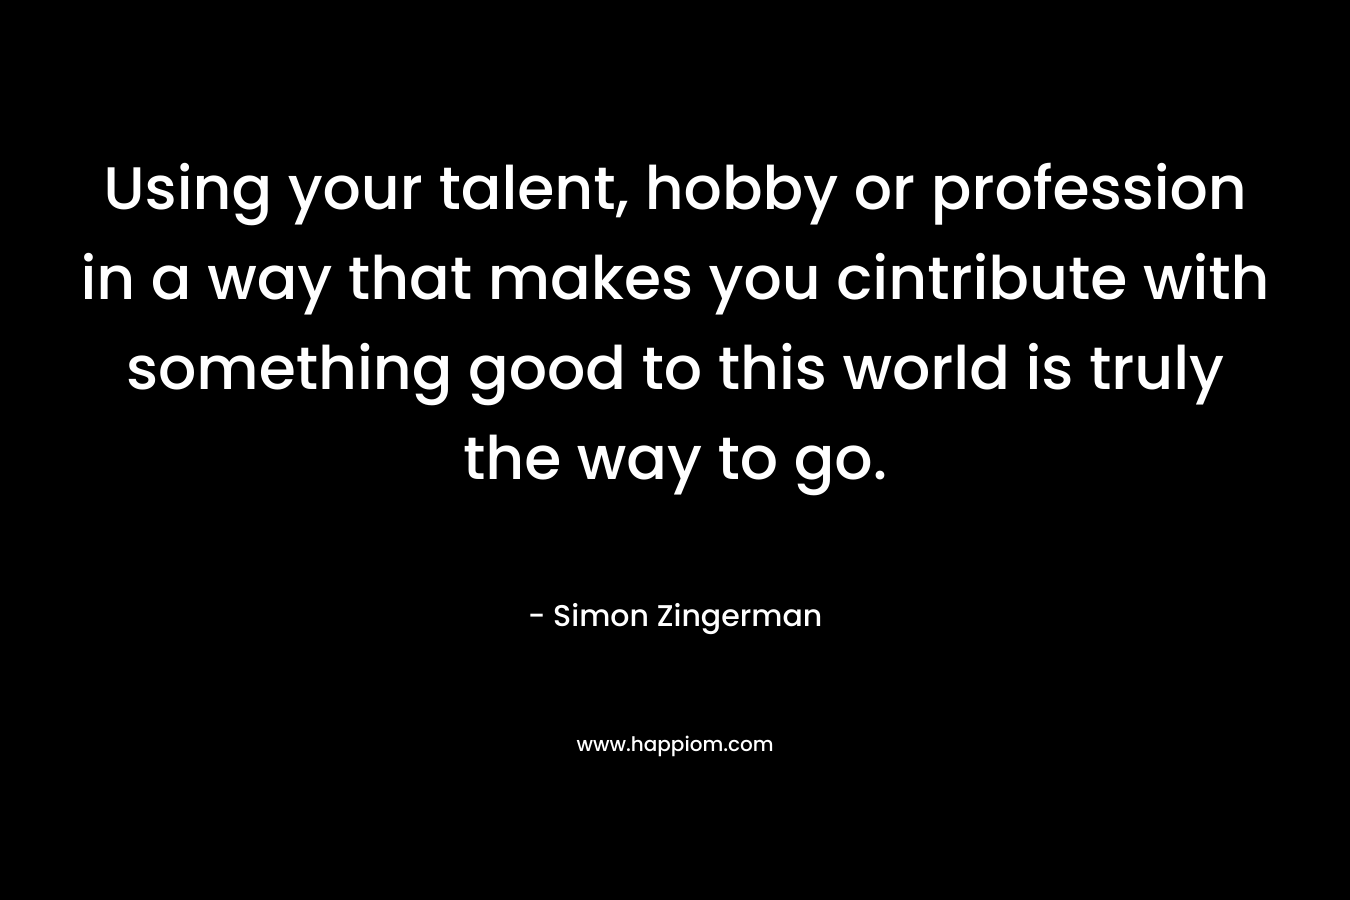 Using your talent, hobby or profession in a way that makes you cintribute with something good to this world is truly the way to go.